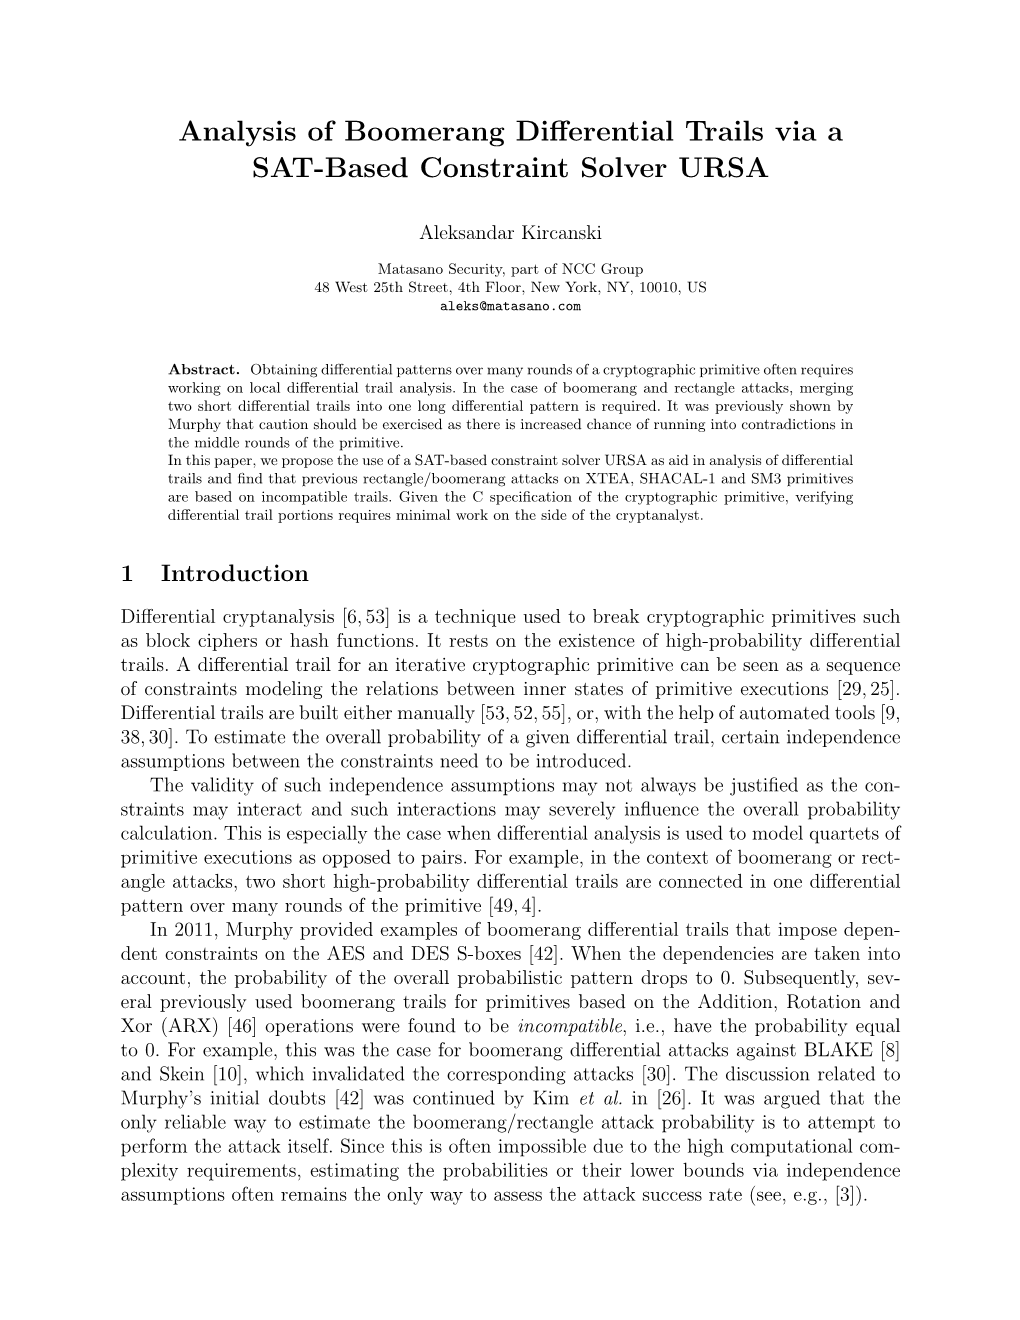 Analysis of Boomerang Di Erential Trails Via a SAT-Based Constraint